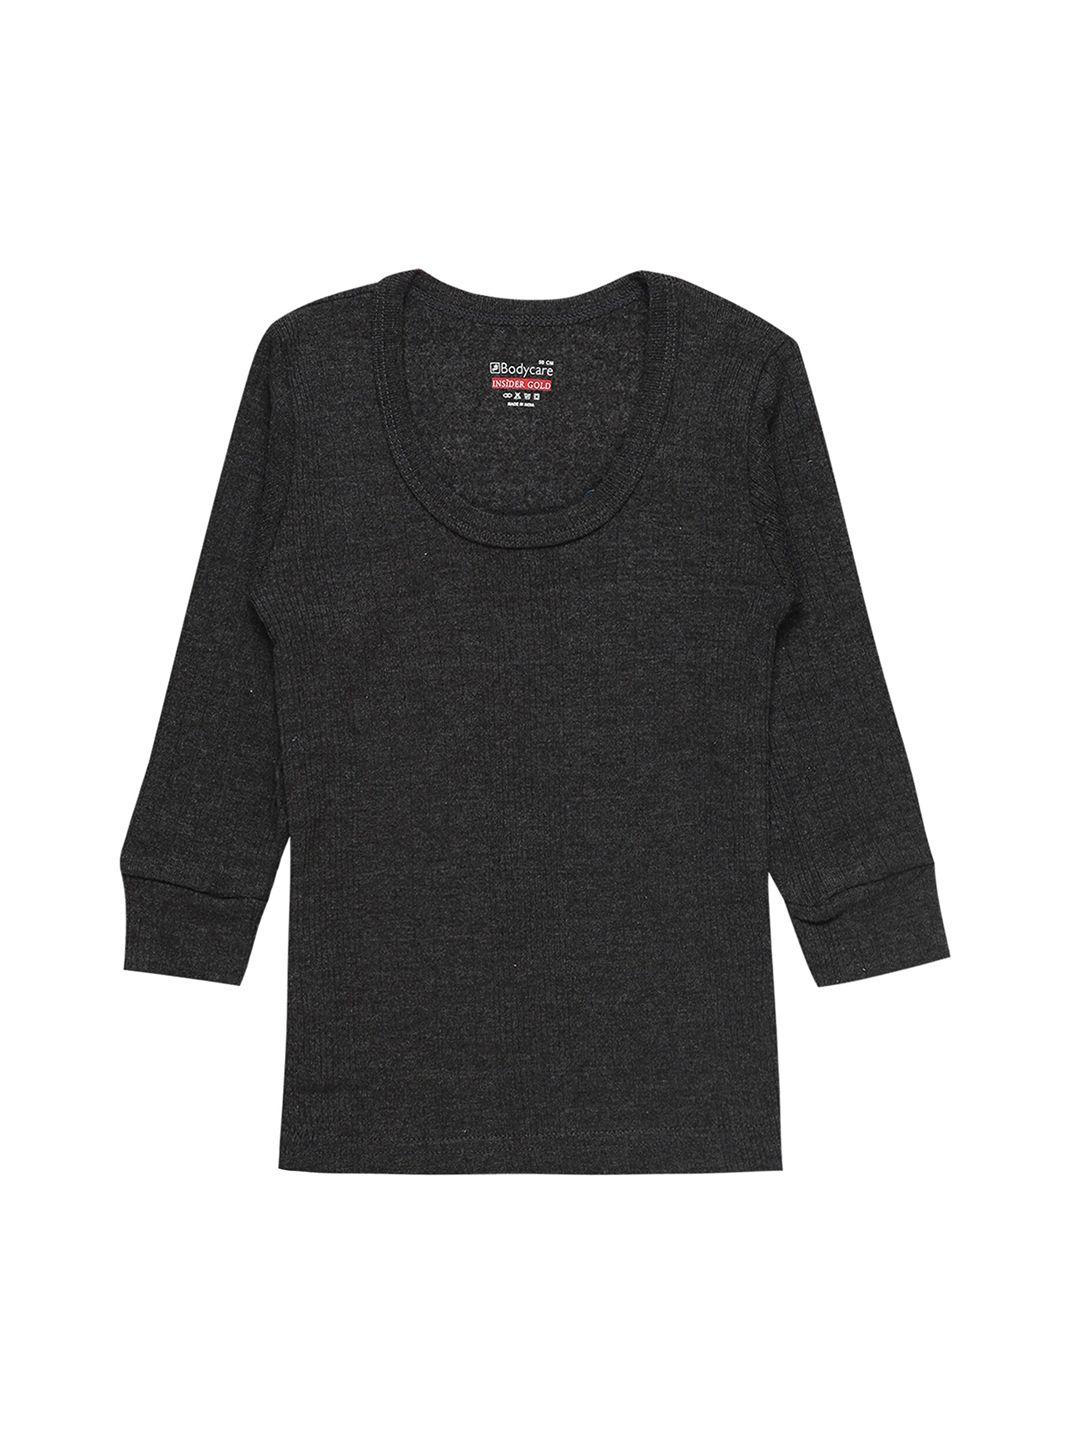 bodycare-kids-boys-charcoal-melange-solid-cotton-thermal-top